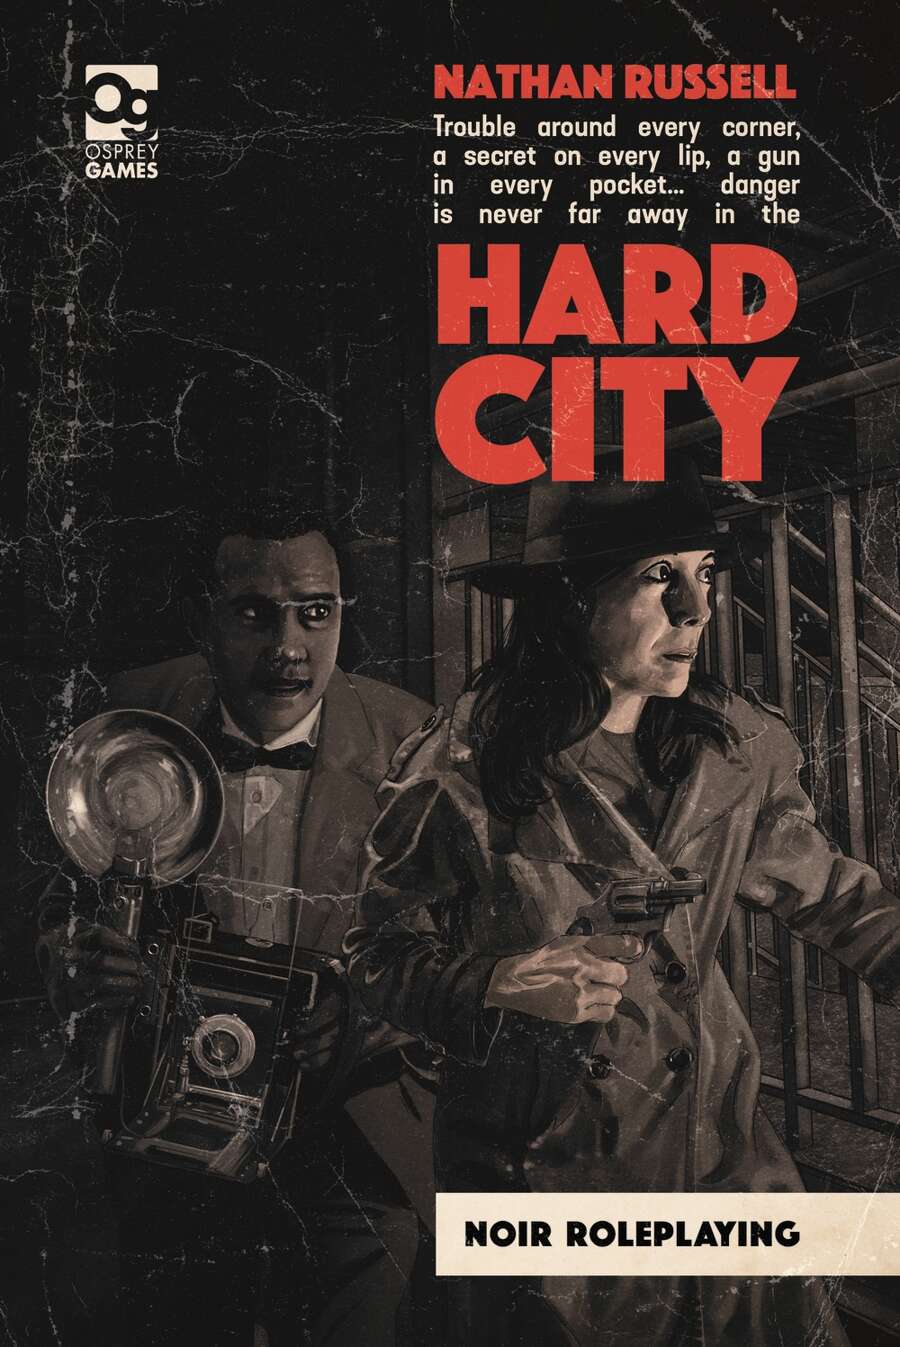 Harder city. Righteous Blood, ruthless Blades.